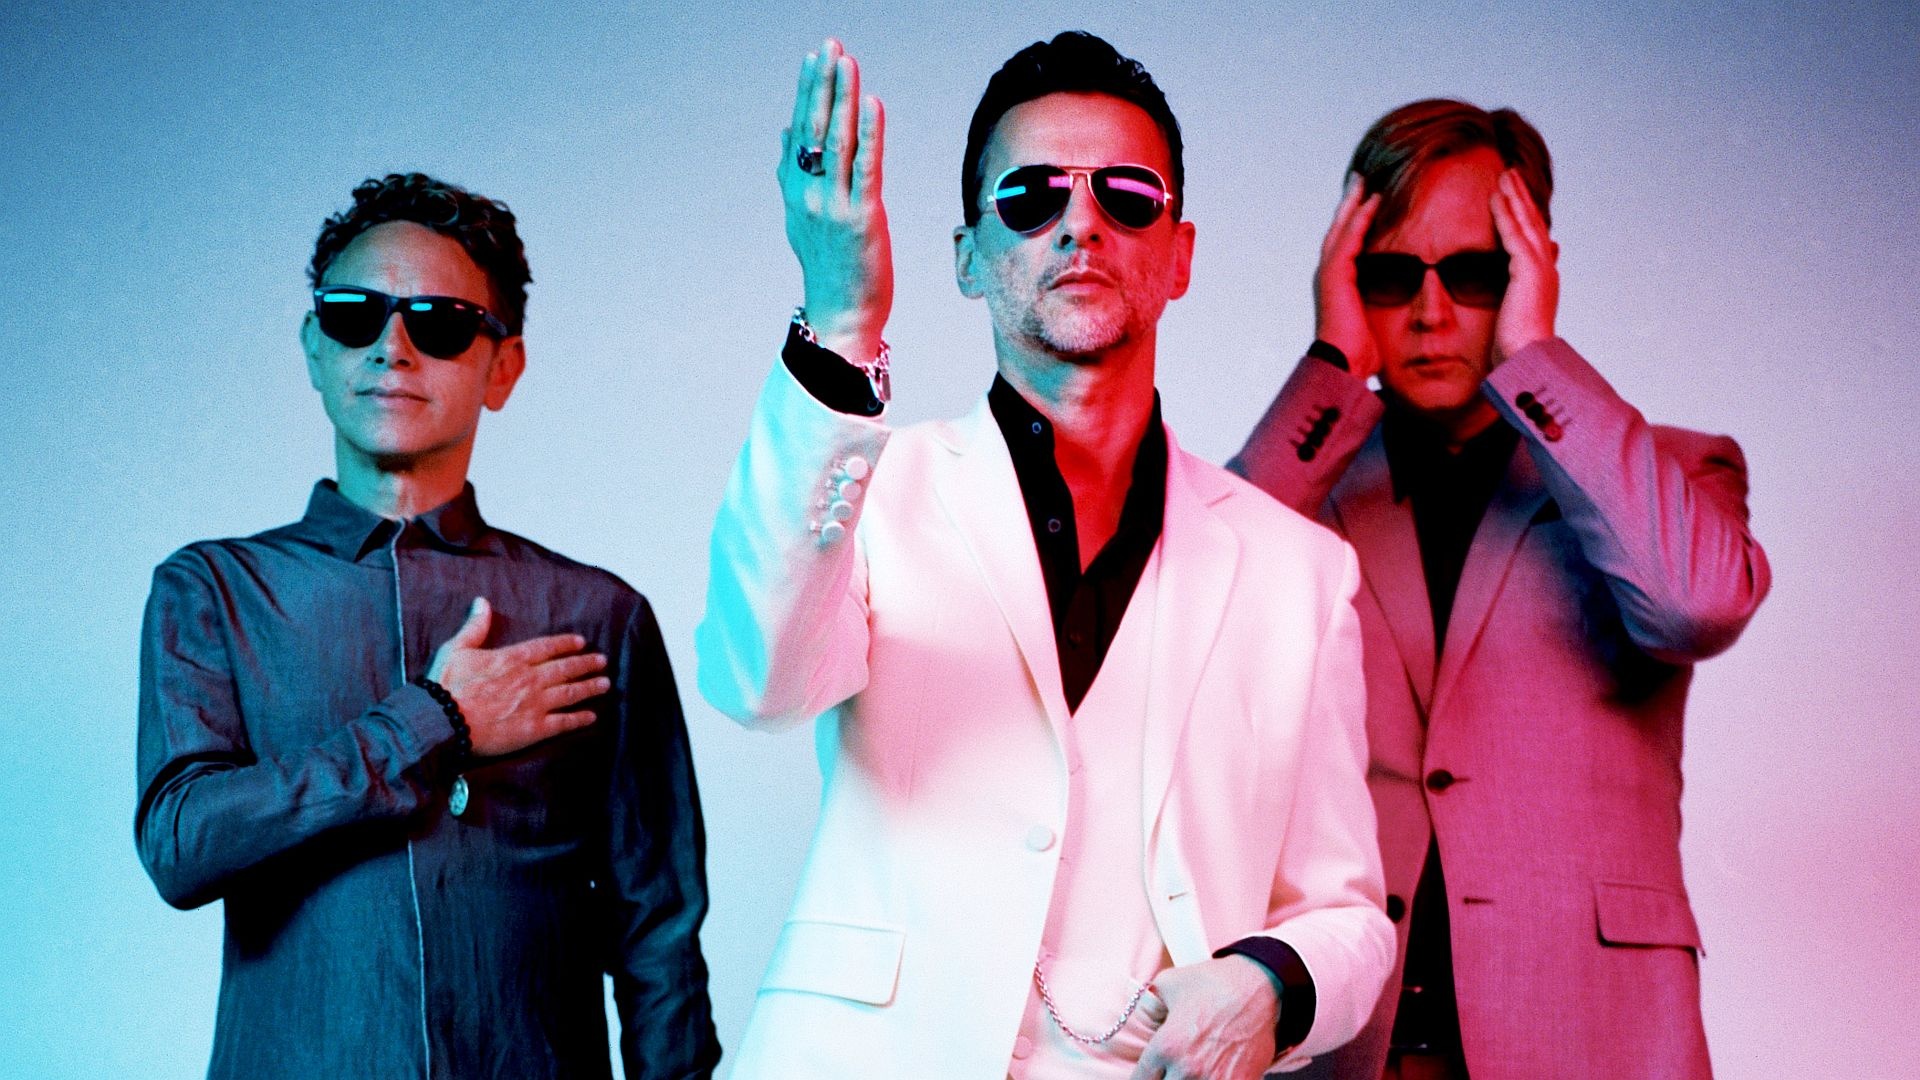 Depeche Mode live show, 80s80s exclusives, Energetic performances, Audience thrill, 1920x1080 Full HD Desktop